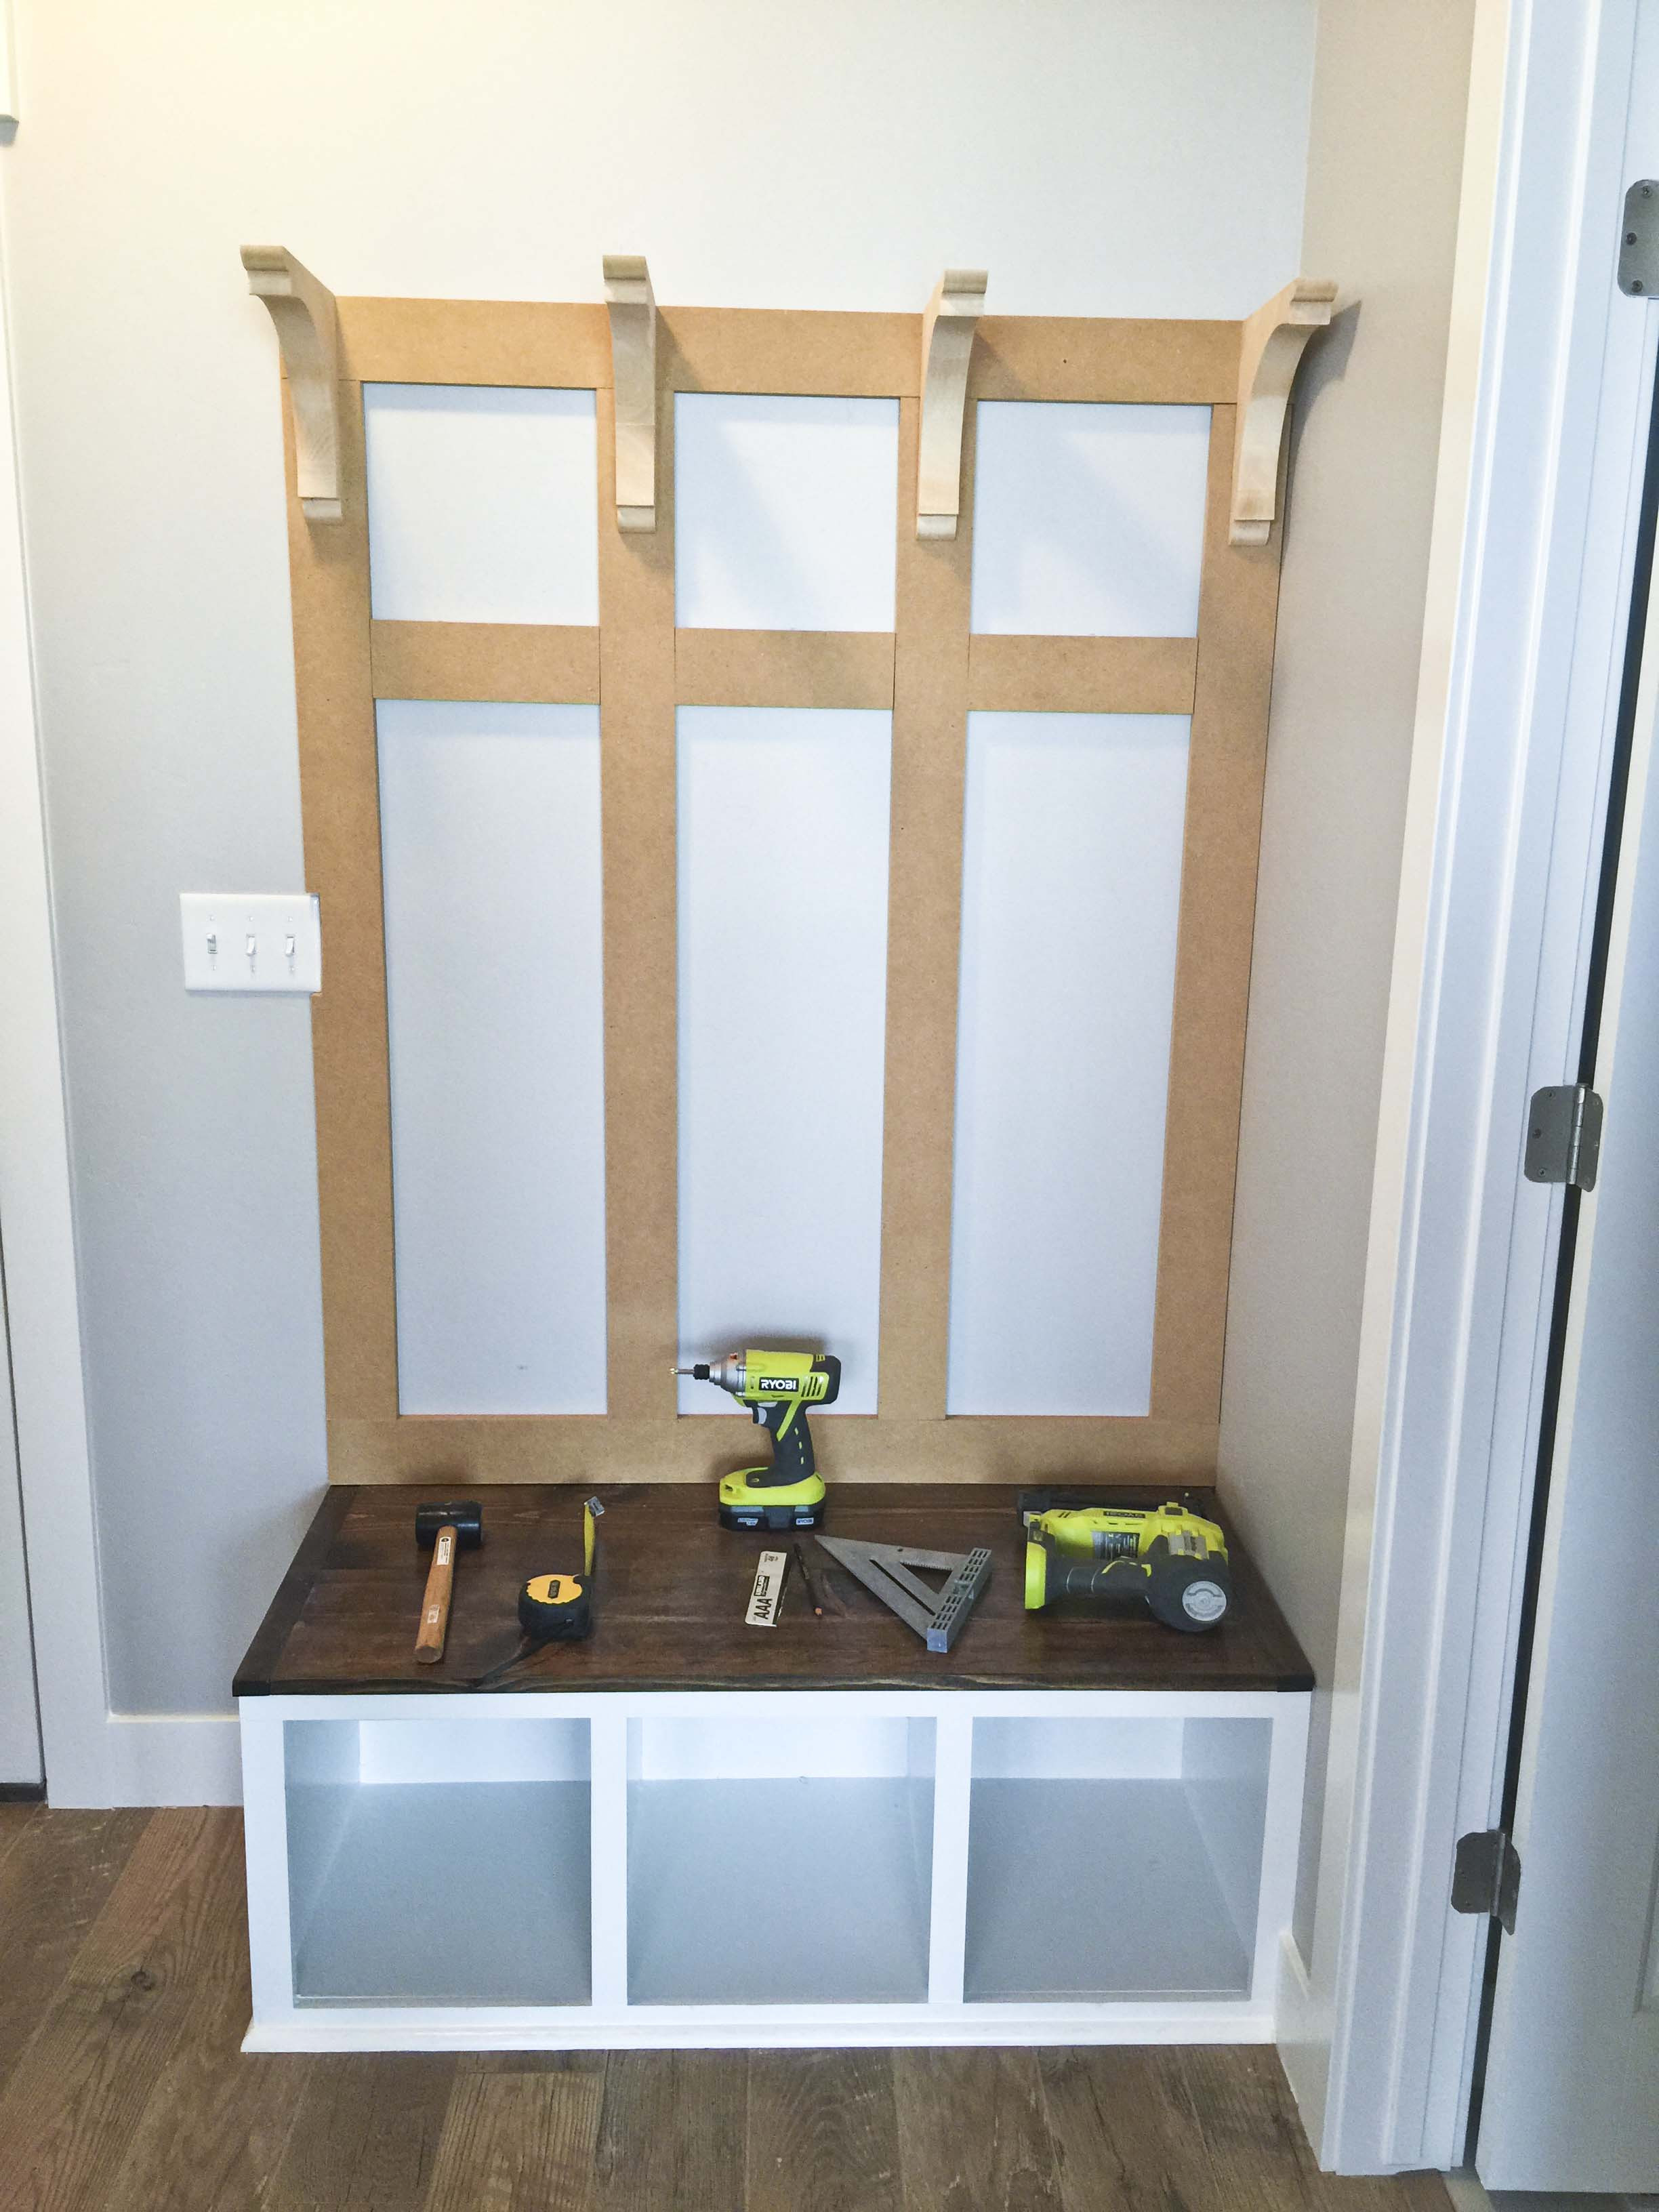 Best ideas about DIY Mudroom Bench Plans
. Save or Pin DIY Mudroom Bench Part 2 HoneyBear Lane Now.